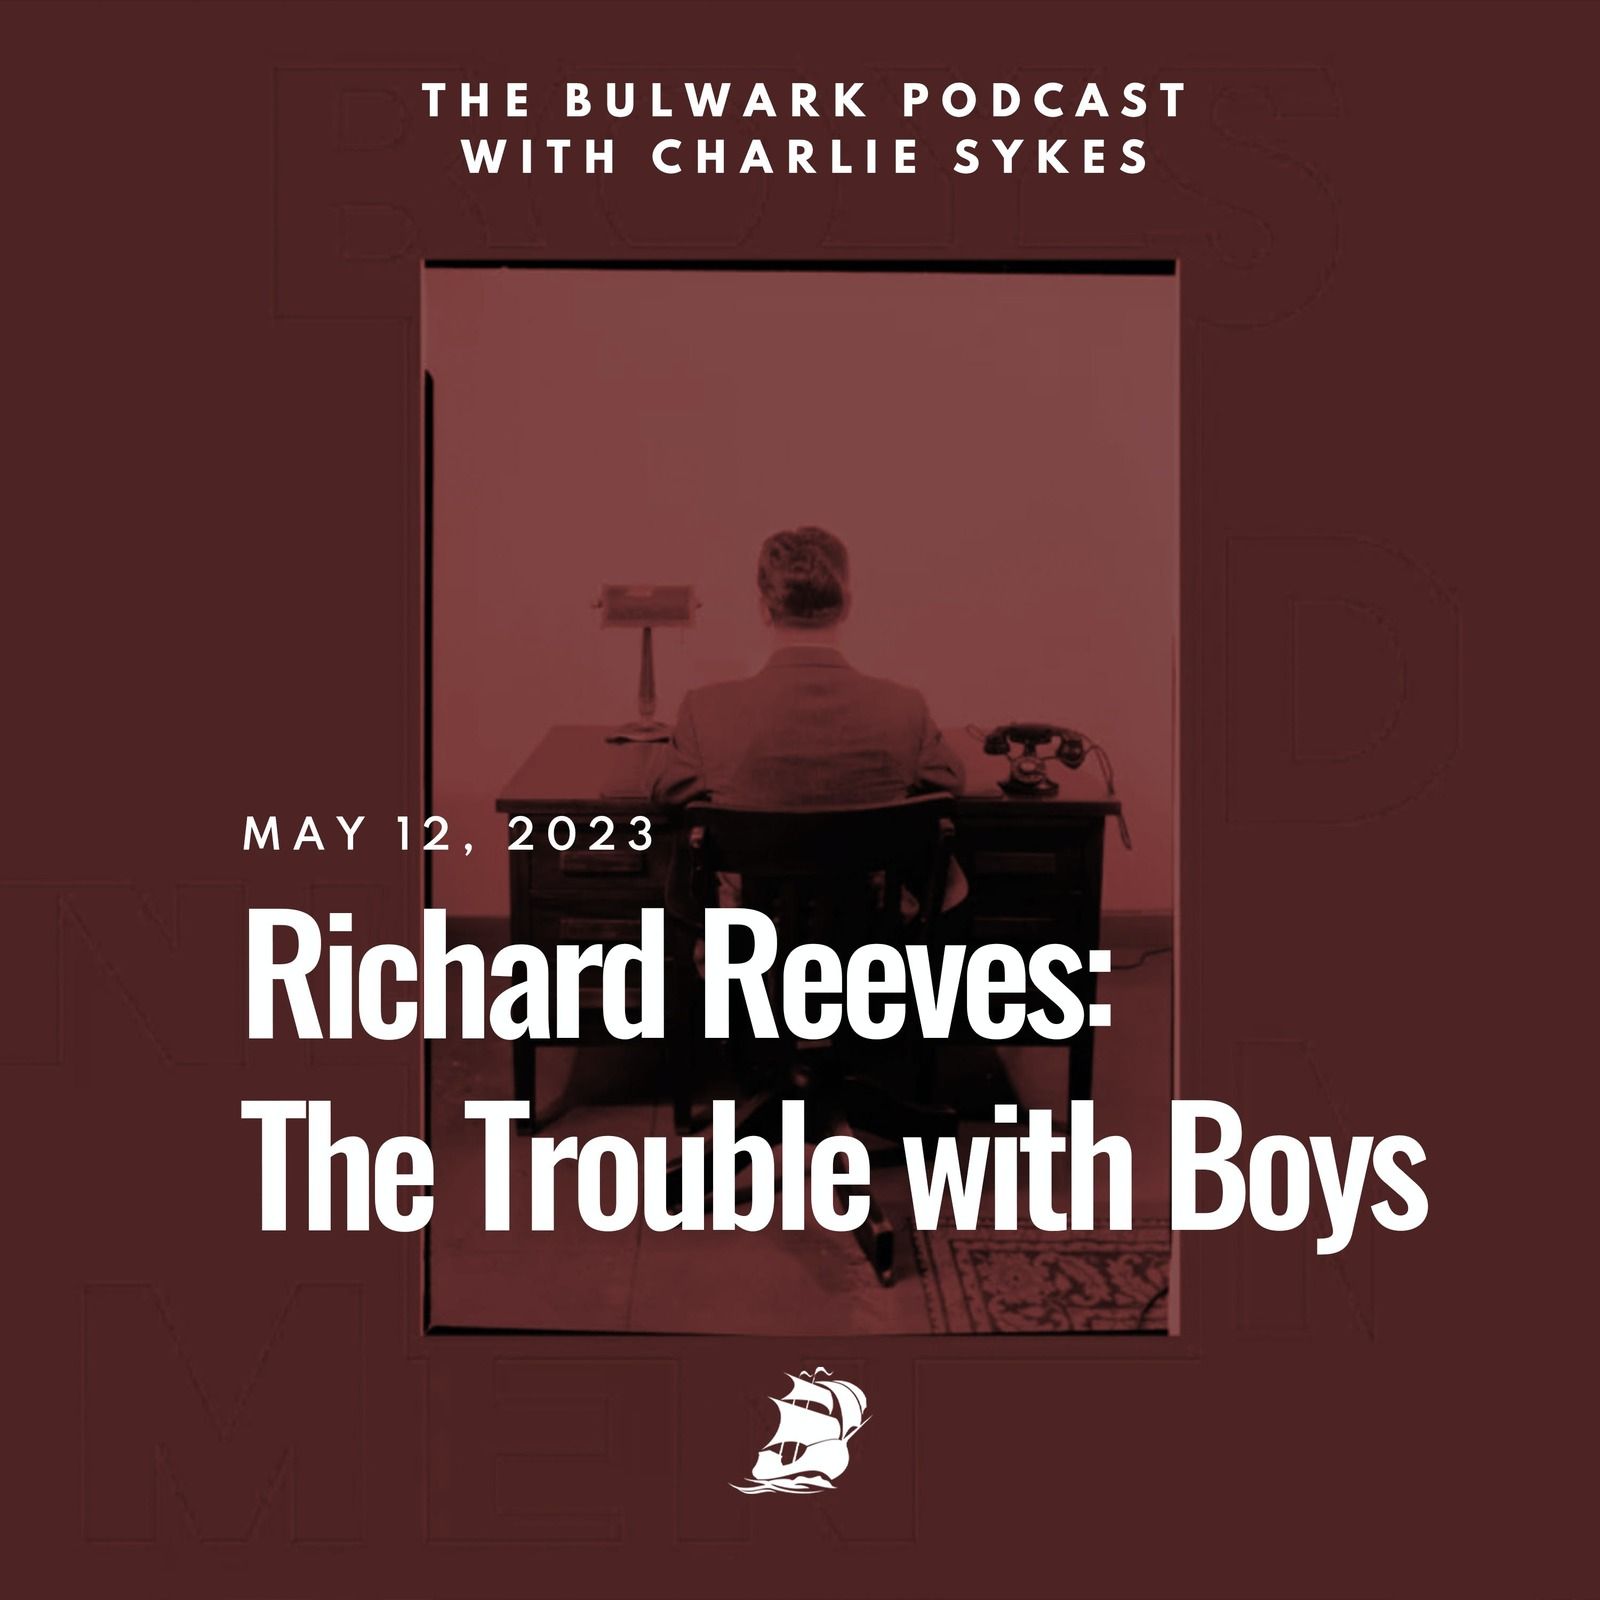 Richard Reeves: The Trouble with Boys